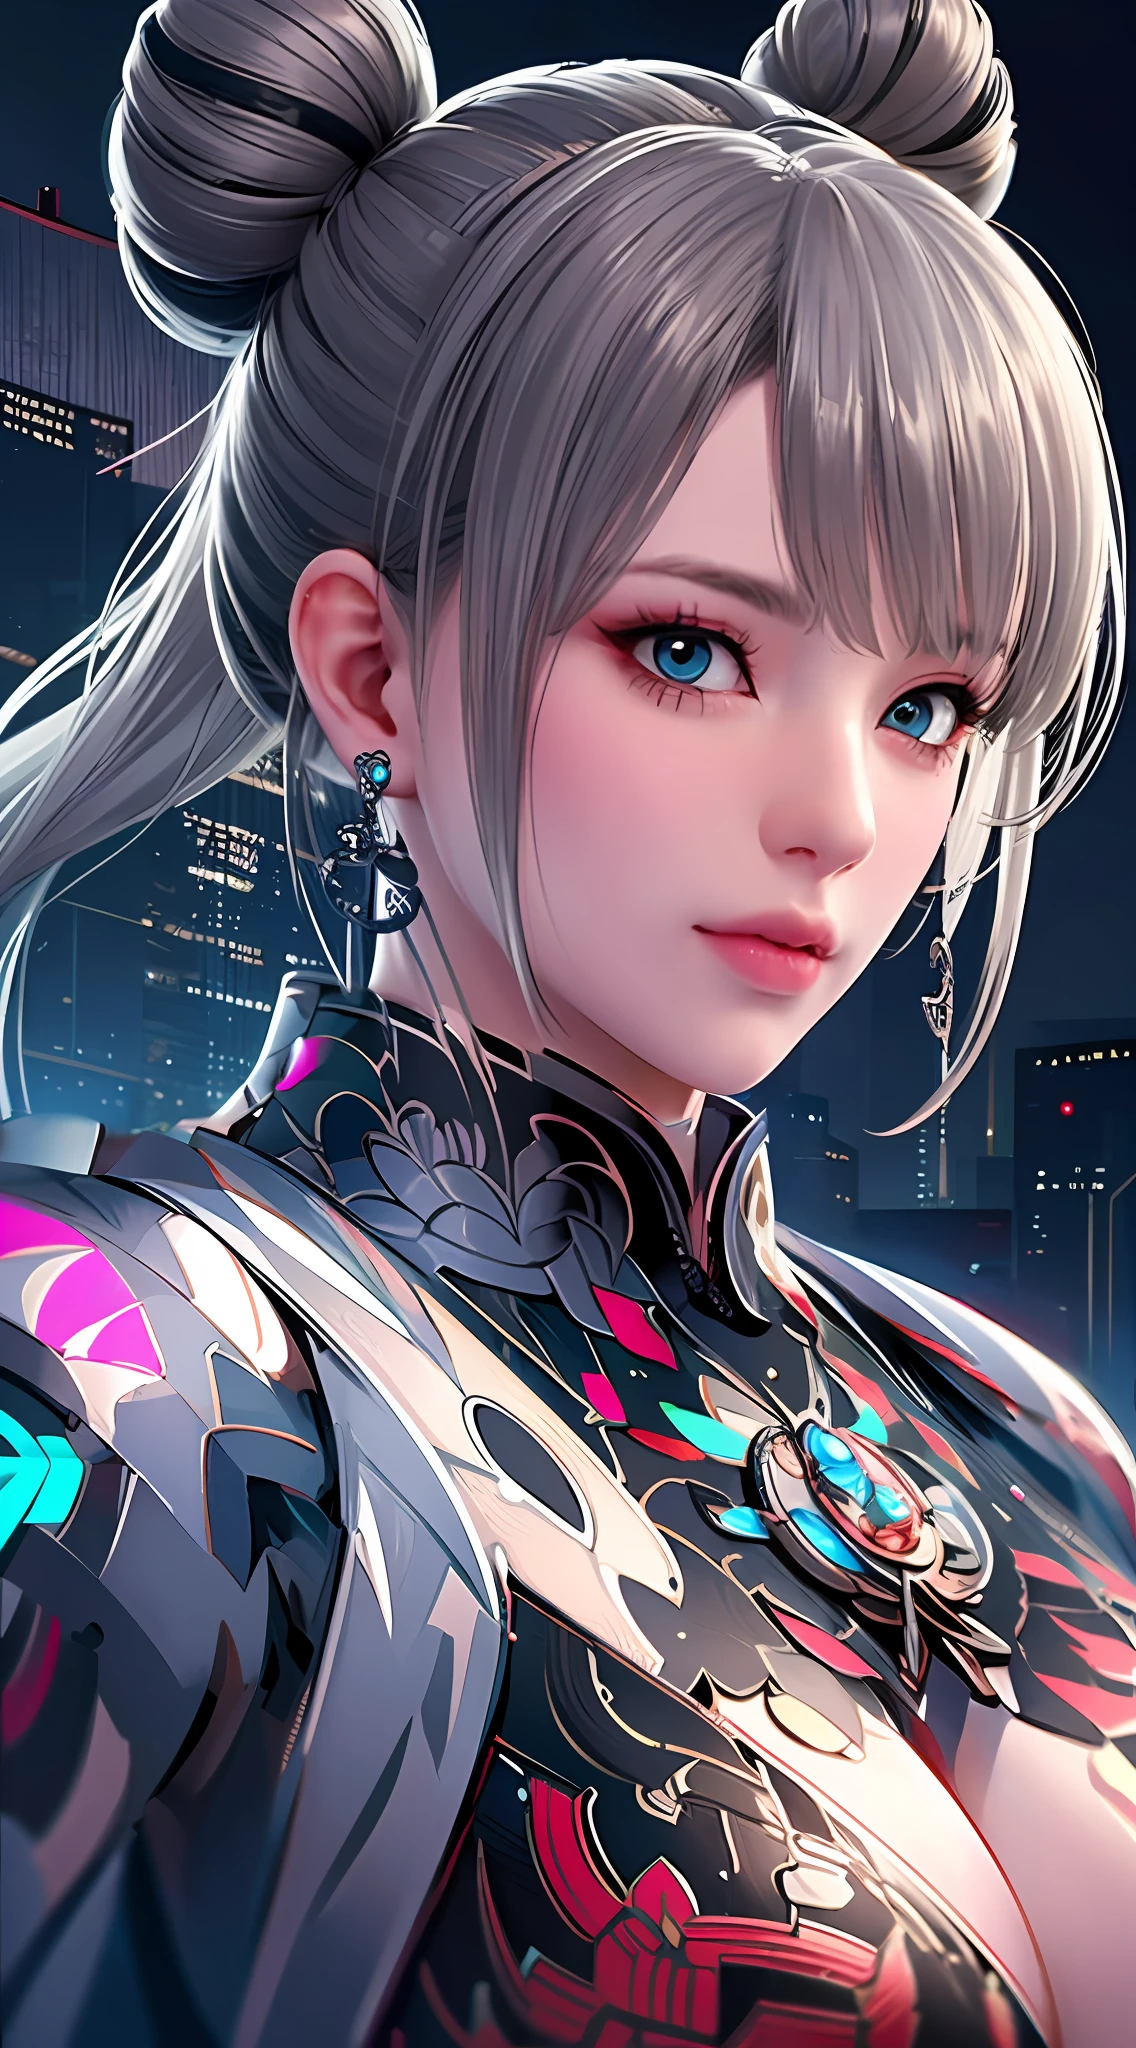 Best Quality, Masterpiece, Ultra High Resolution, (Realistic: 1.4), Symmetrical Communication, 1 Girl, Close-up, Pose, Cyberhan, Internet Street, {{Neon}}, Colorful, Sci-Fi Color, Futuristic, Tech, Complex Background, Best Shadow, Futuristic Fantasy, Metallic, Chinese_Clothes, Cyberhan, Cheongsam, ((Cyberpunk City)), Dynamic Pose, Glowing Headphones, Glowing Hair Accessories, Long Hair, Glowing Earrings, Glowing Necklace, Cyberpunk, ((High-tech City)), ((Full of Mechanical and Futuristic Elements)), Futurism, Technology, Glowing Neon, Pink, Pink Light, Laser, Digital Background City High Sky, Big Moon, With Vehicle, Best Quality, Masterpiece, 8K, Character Edge Light, Super High Detail, High Quality, The Most Beautiful Woman in Mankind, Slight Smile, Face Facing Front Left and Right Symmetry, Ear Decoration, Beautiful Pupil Light Effects, Visual Data, Silver White Hair, Long Hair Over the Waist , Luminous Electronic Watch, Deep Eyes, Happy, English Doodle, (((huge breasts))), (((hyper-detailed facial texture))), (((silvery-white hair)))